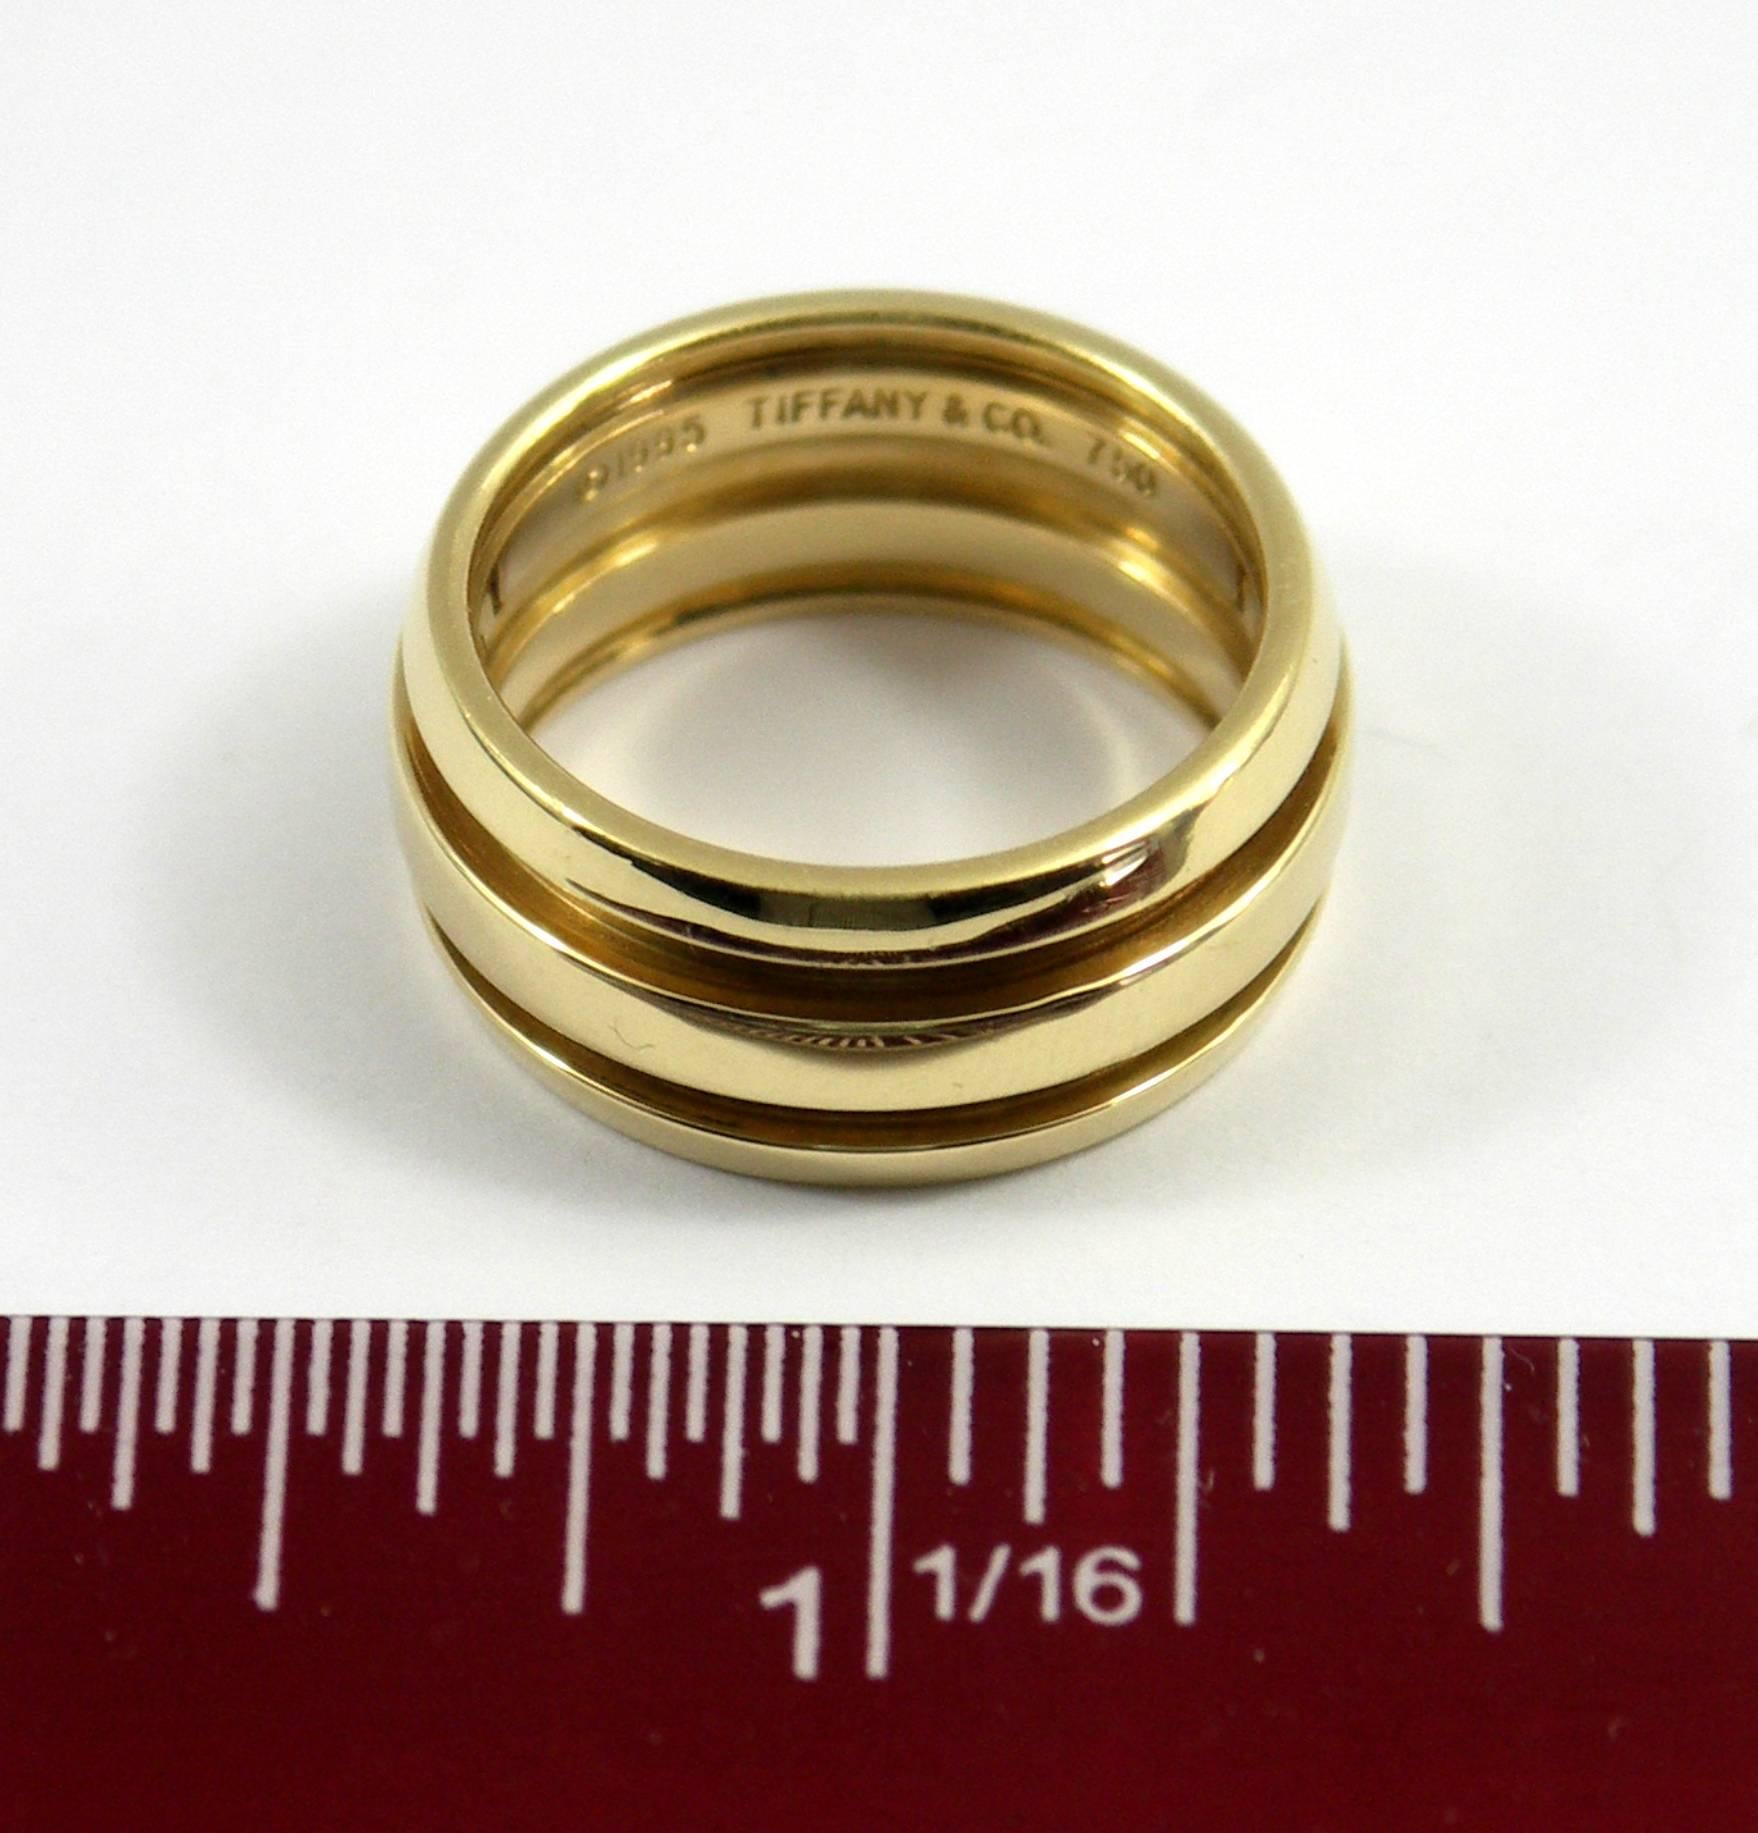 Tiffany & Co. Satin and High Polished Gold Band Ring 2